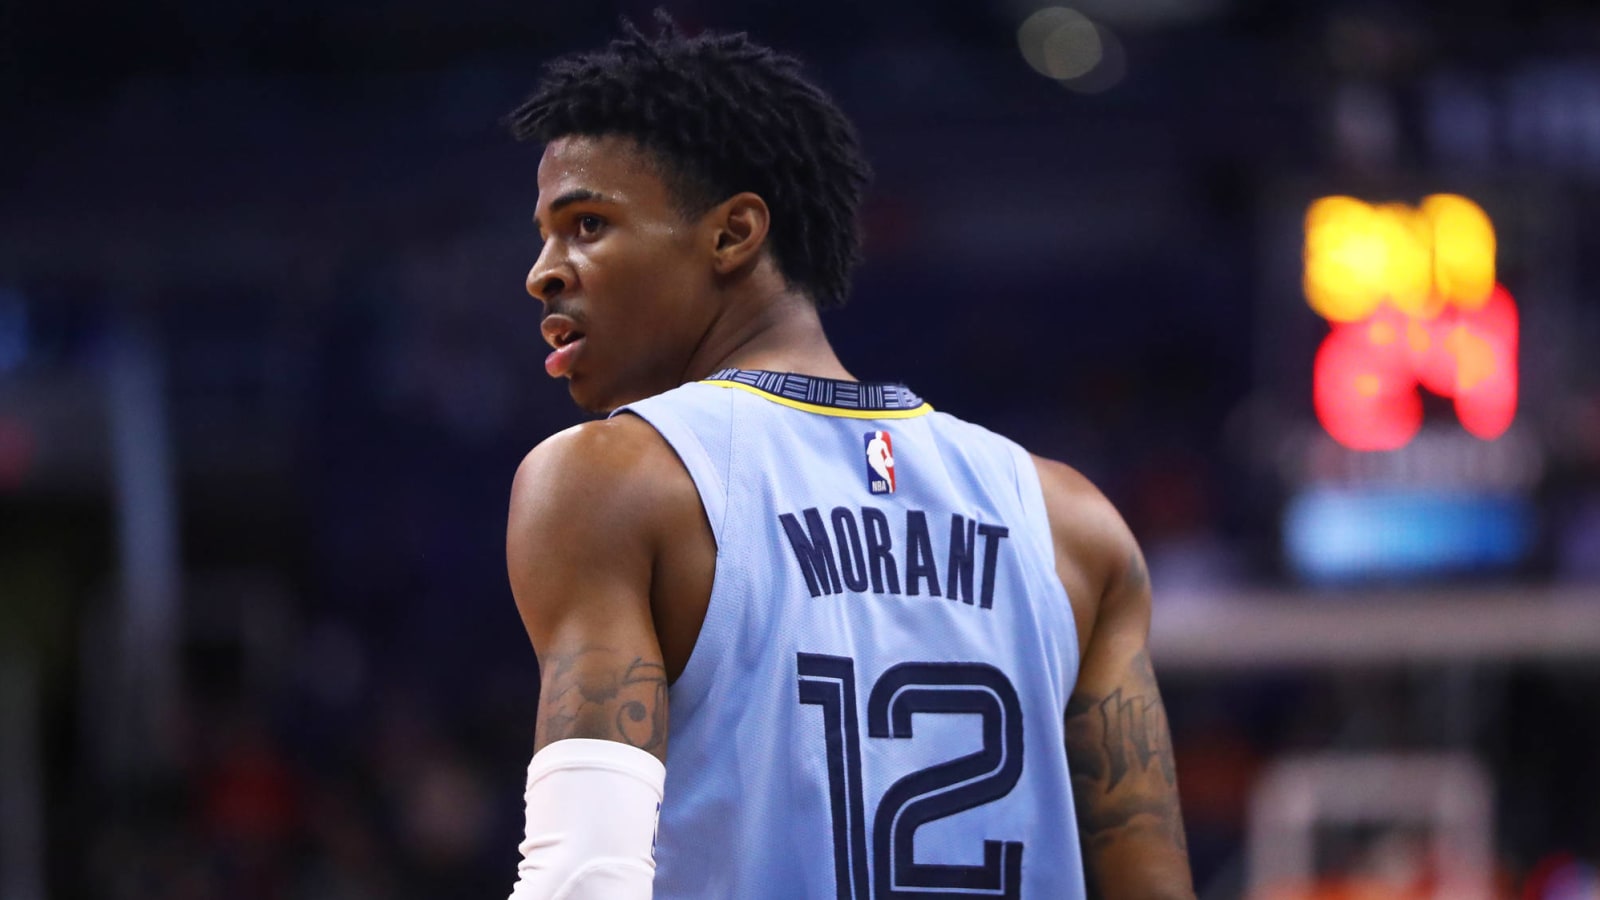 Watch: Ja Morant just ended Aron Baynes with filthy poster